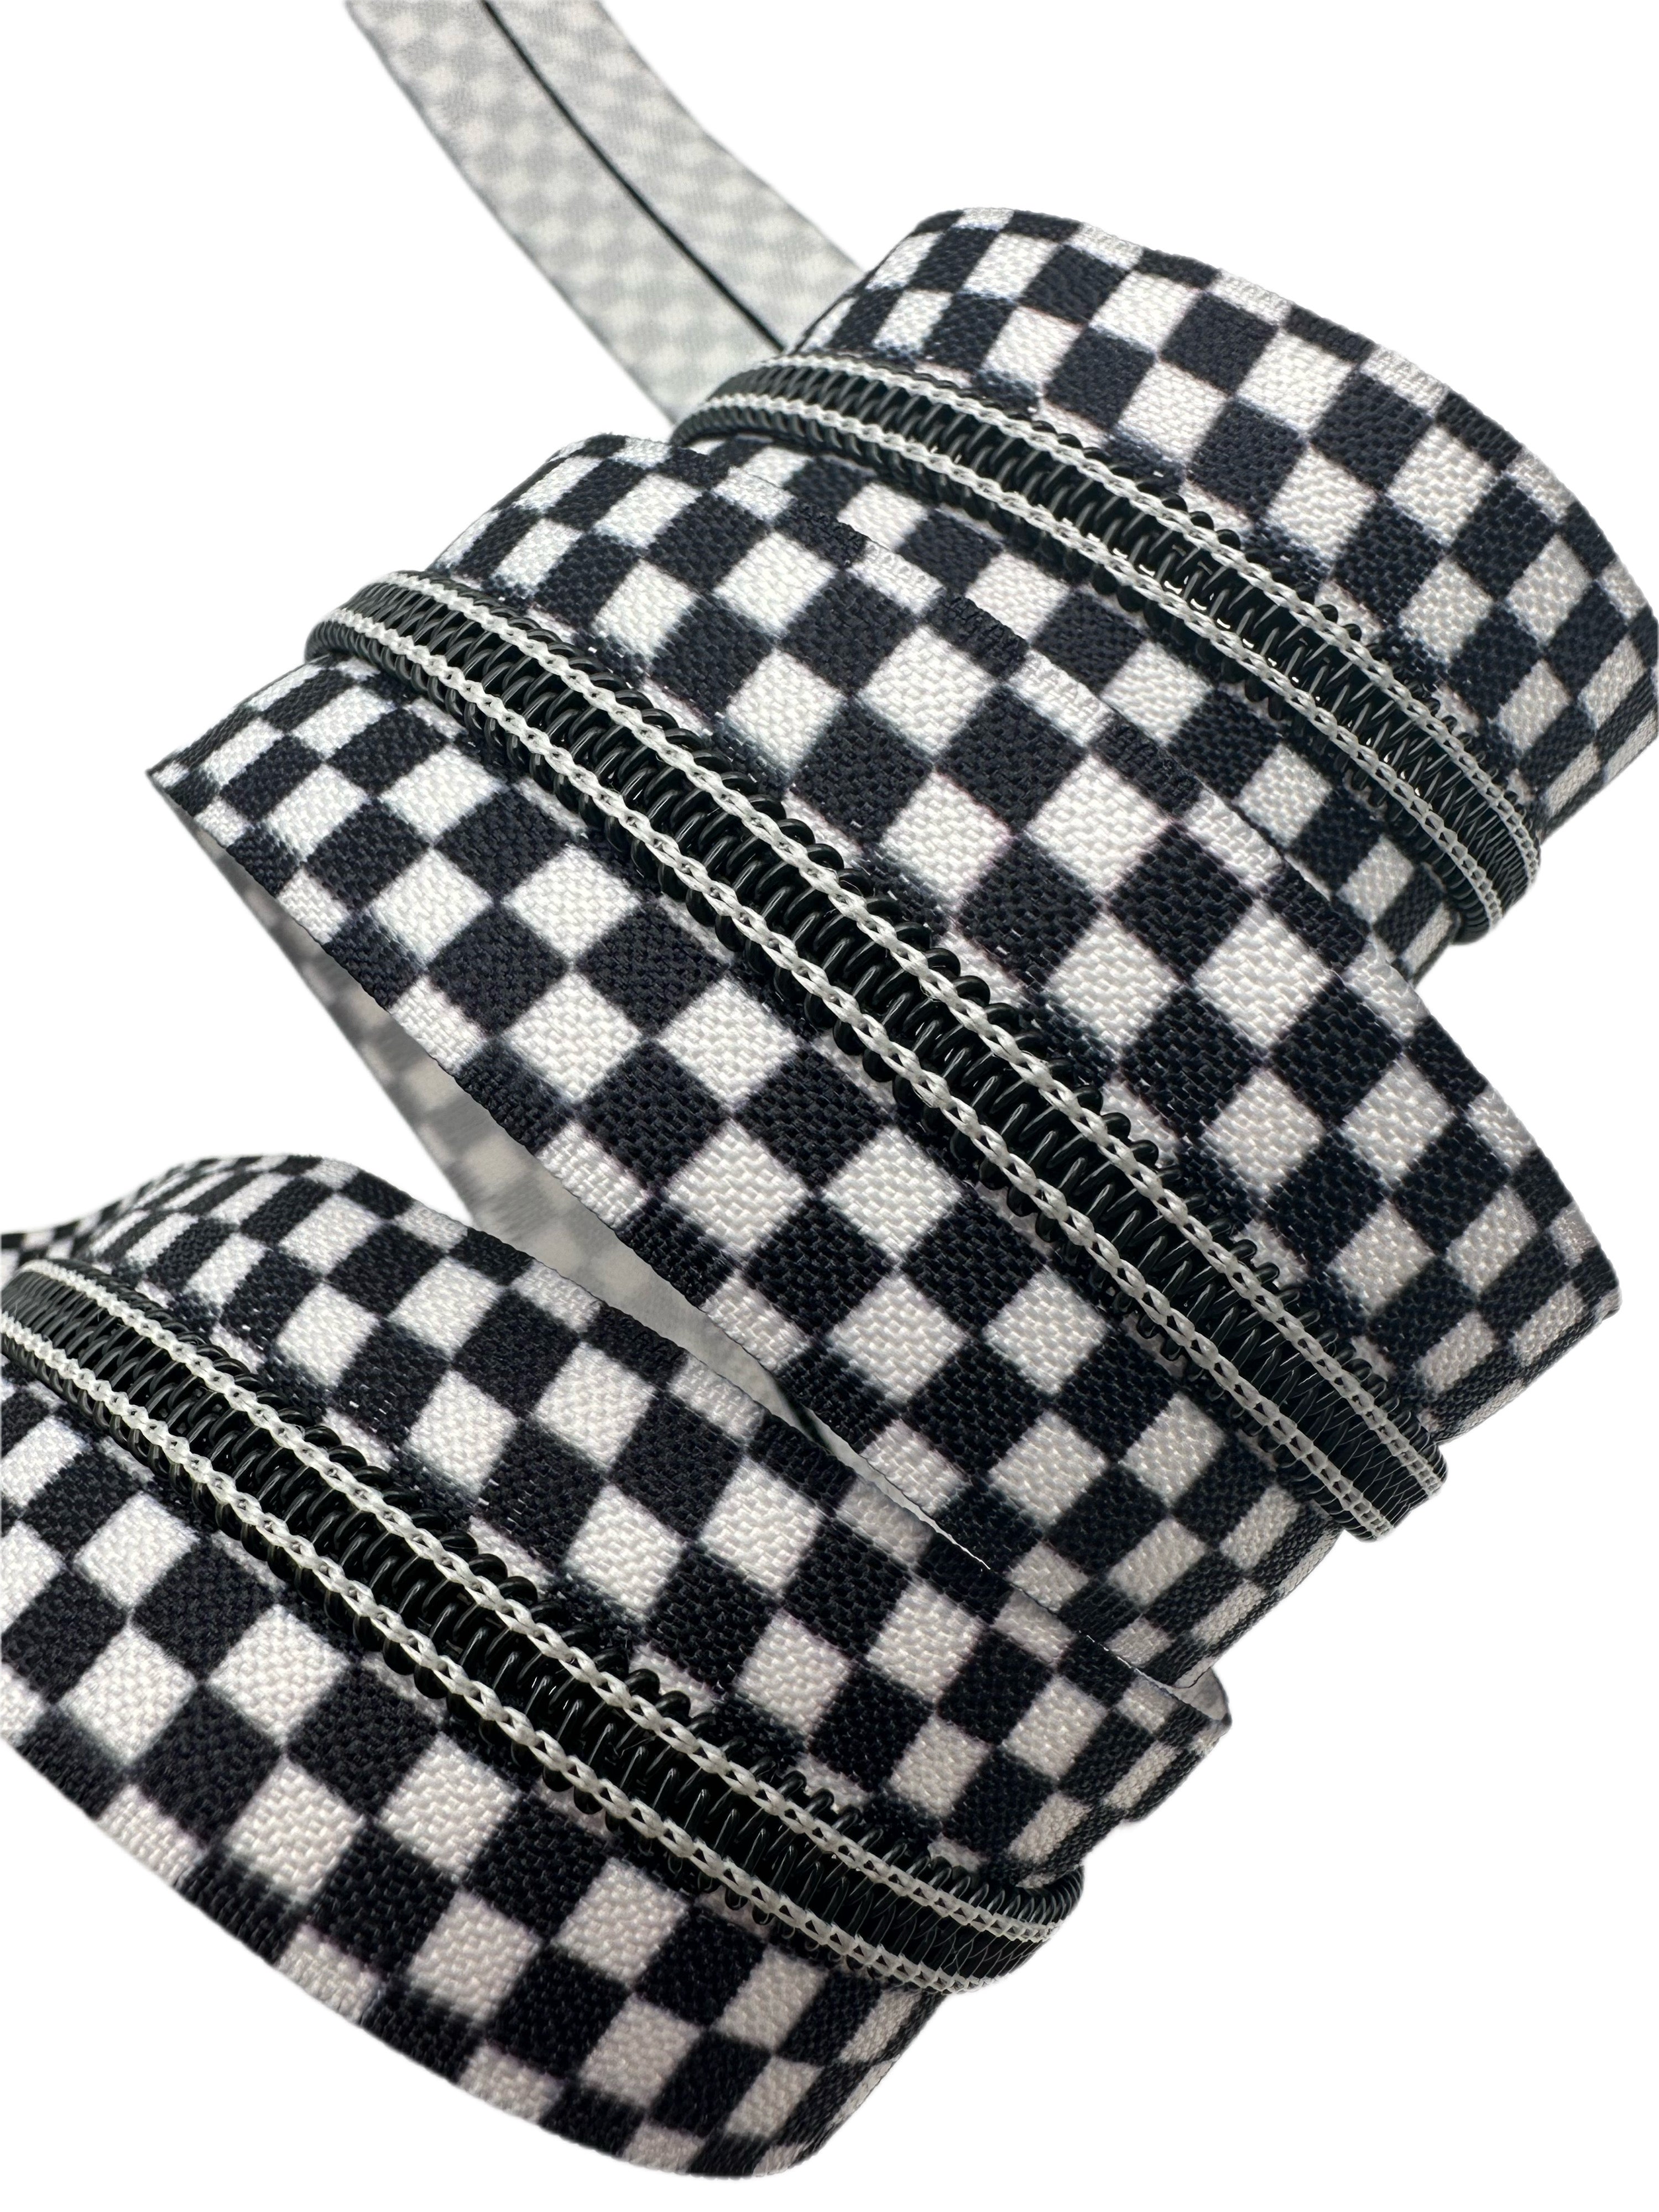 Black and White Checker Tape with Black Teeth Zipper Tape